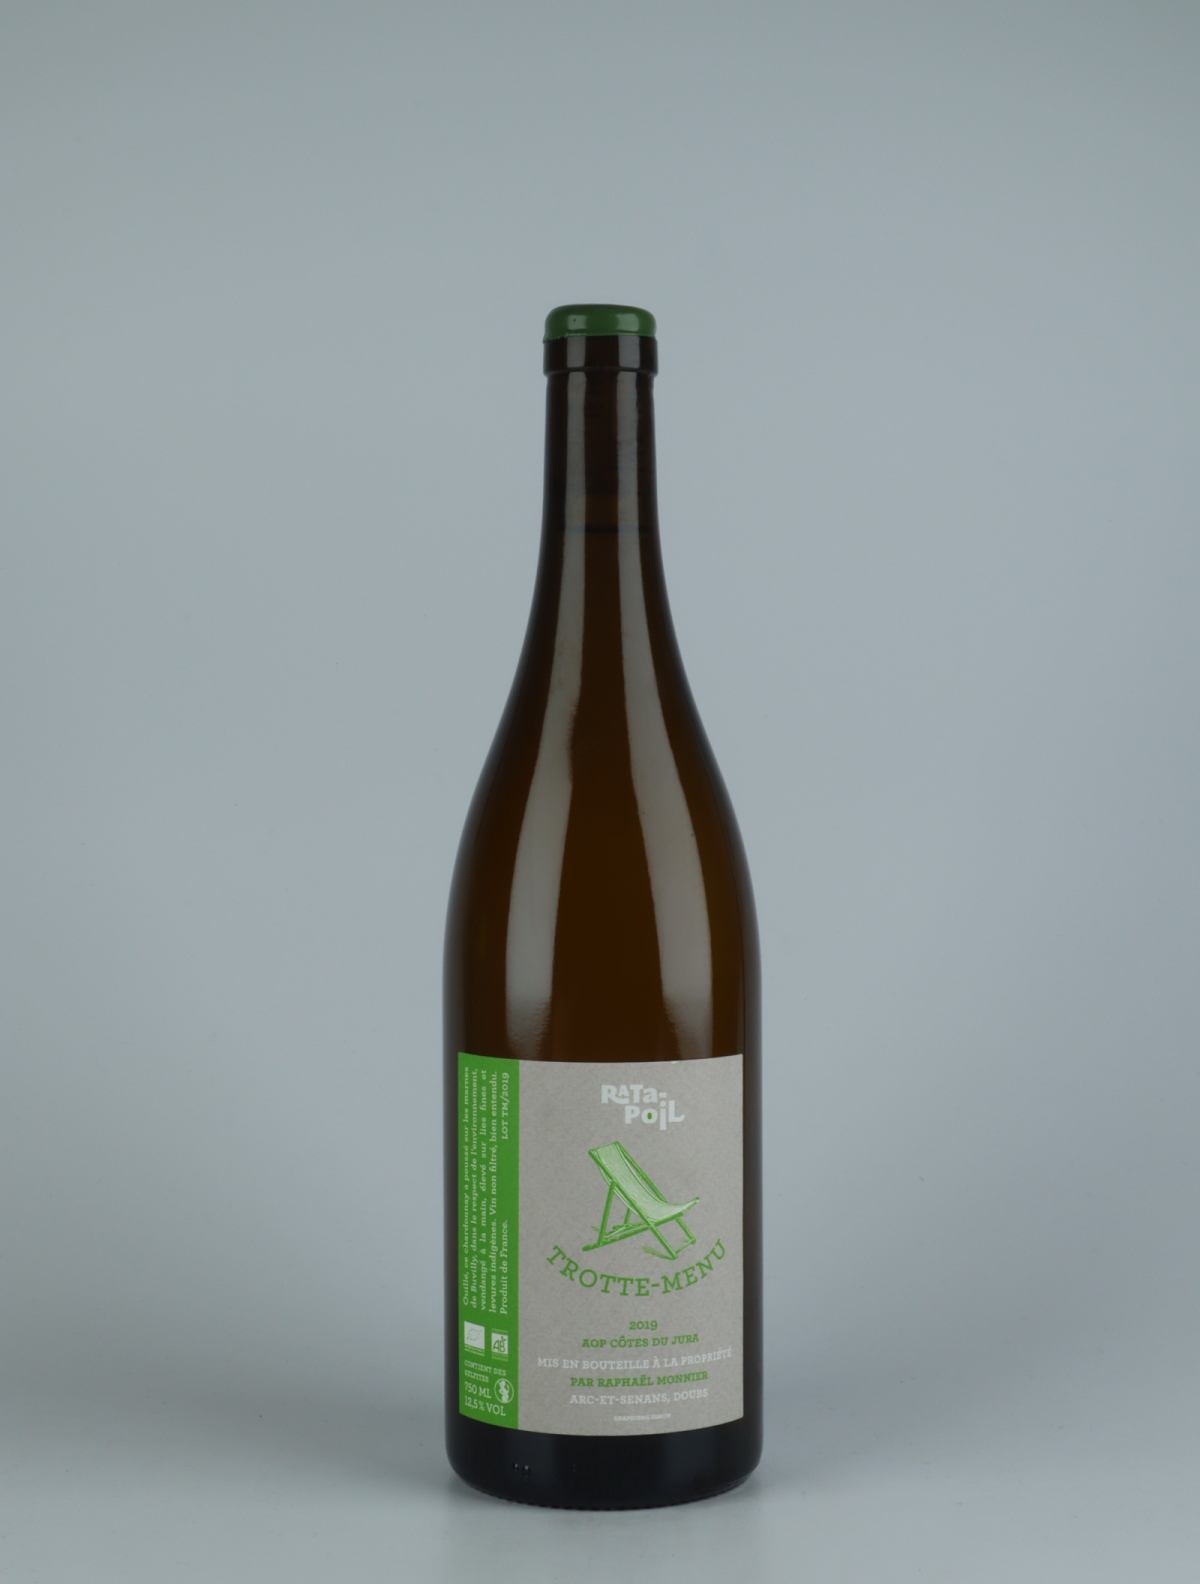 A bottle 2019 Trotte Menu White wine from Domaine Ratapoil, Jura in France